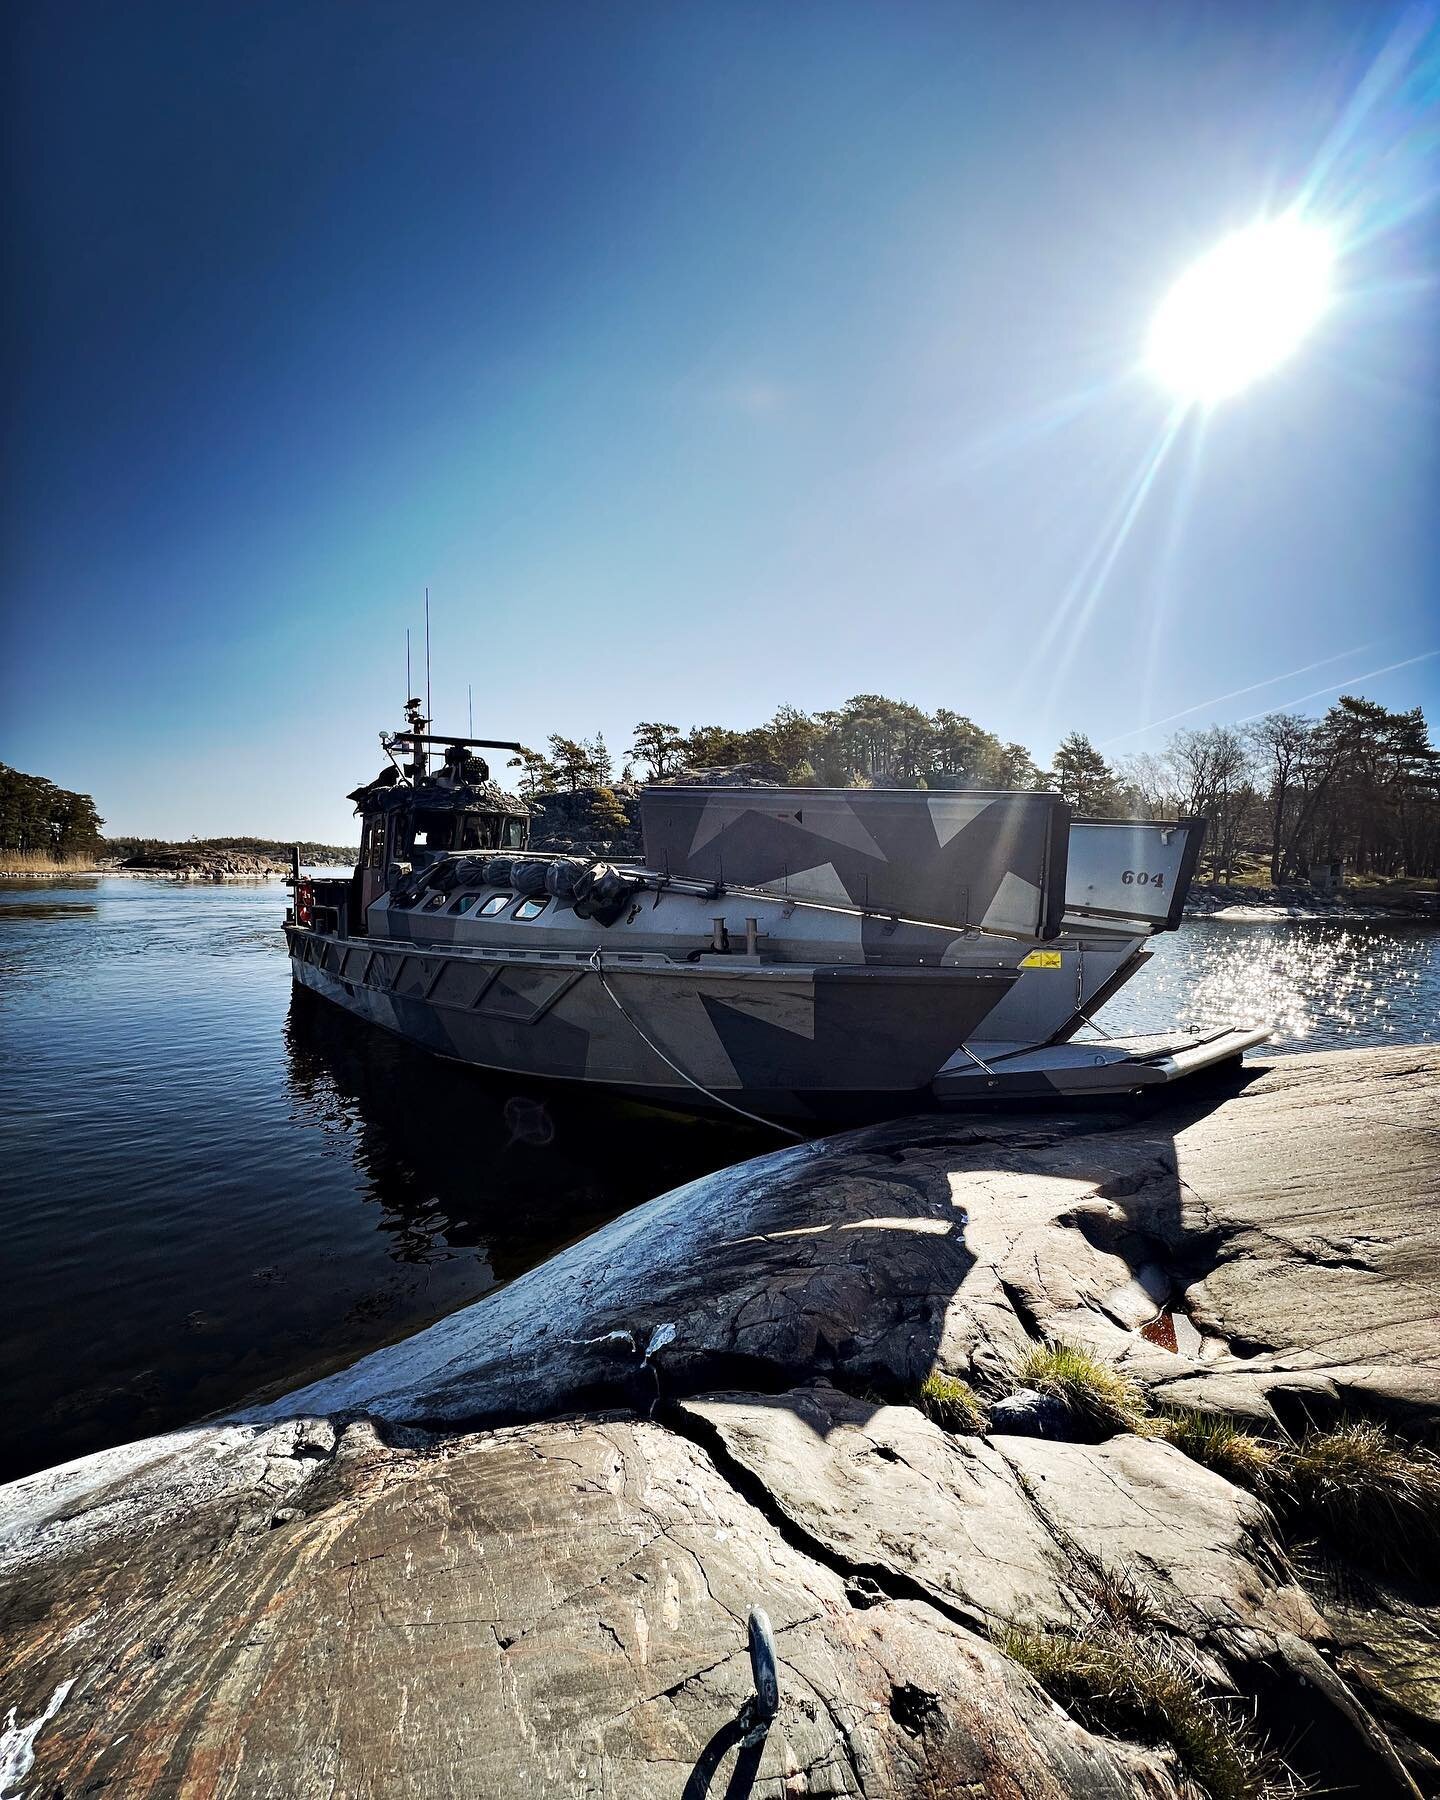 Scouting in Hanko🌞 #hanko #visithanko #visitfinland #konflikti #military #navy #scouting #filmproduction #behindthescenes #moviemaking #locationmanager #filmscout